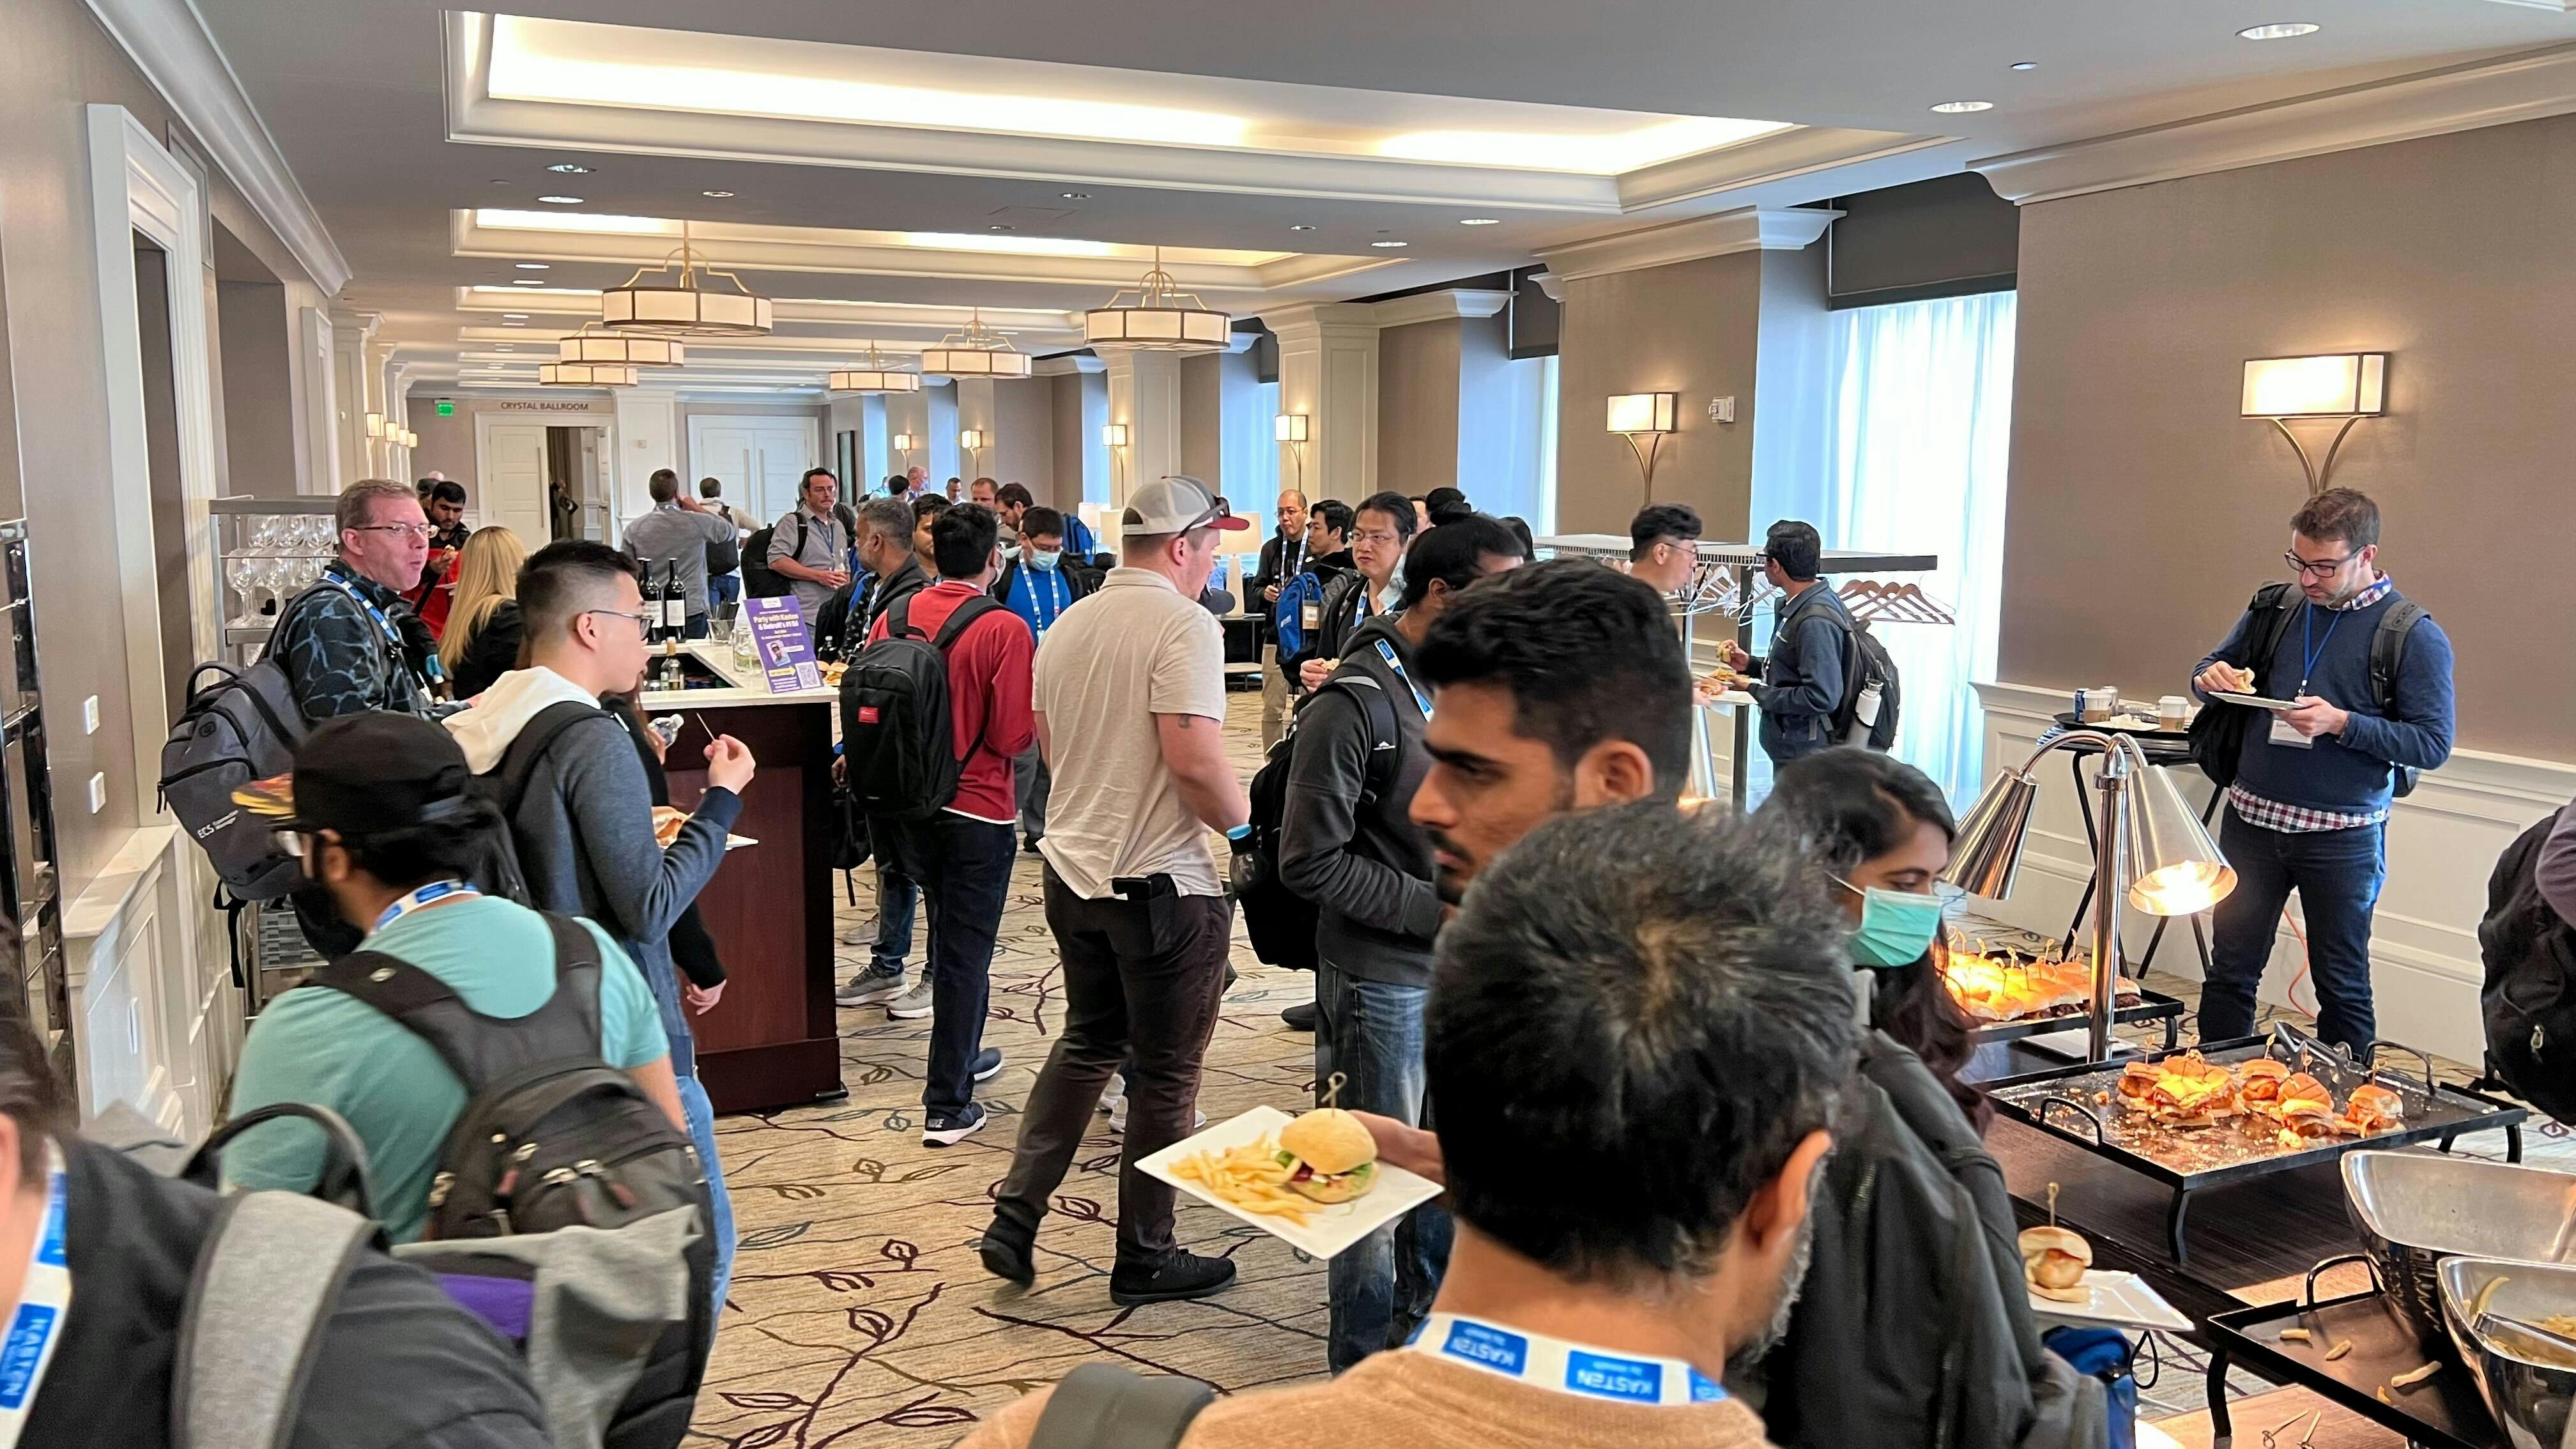 People mingling and eating at the Learning Day Featuring Kubernetes hosted by Kasten